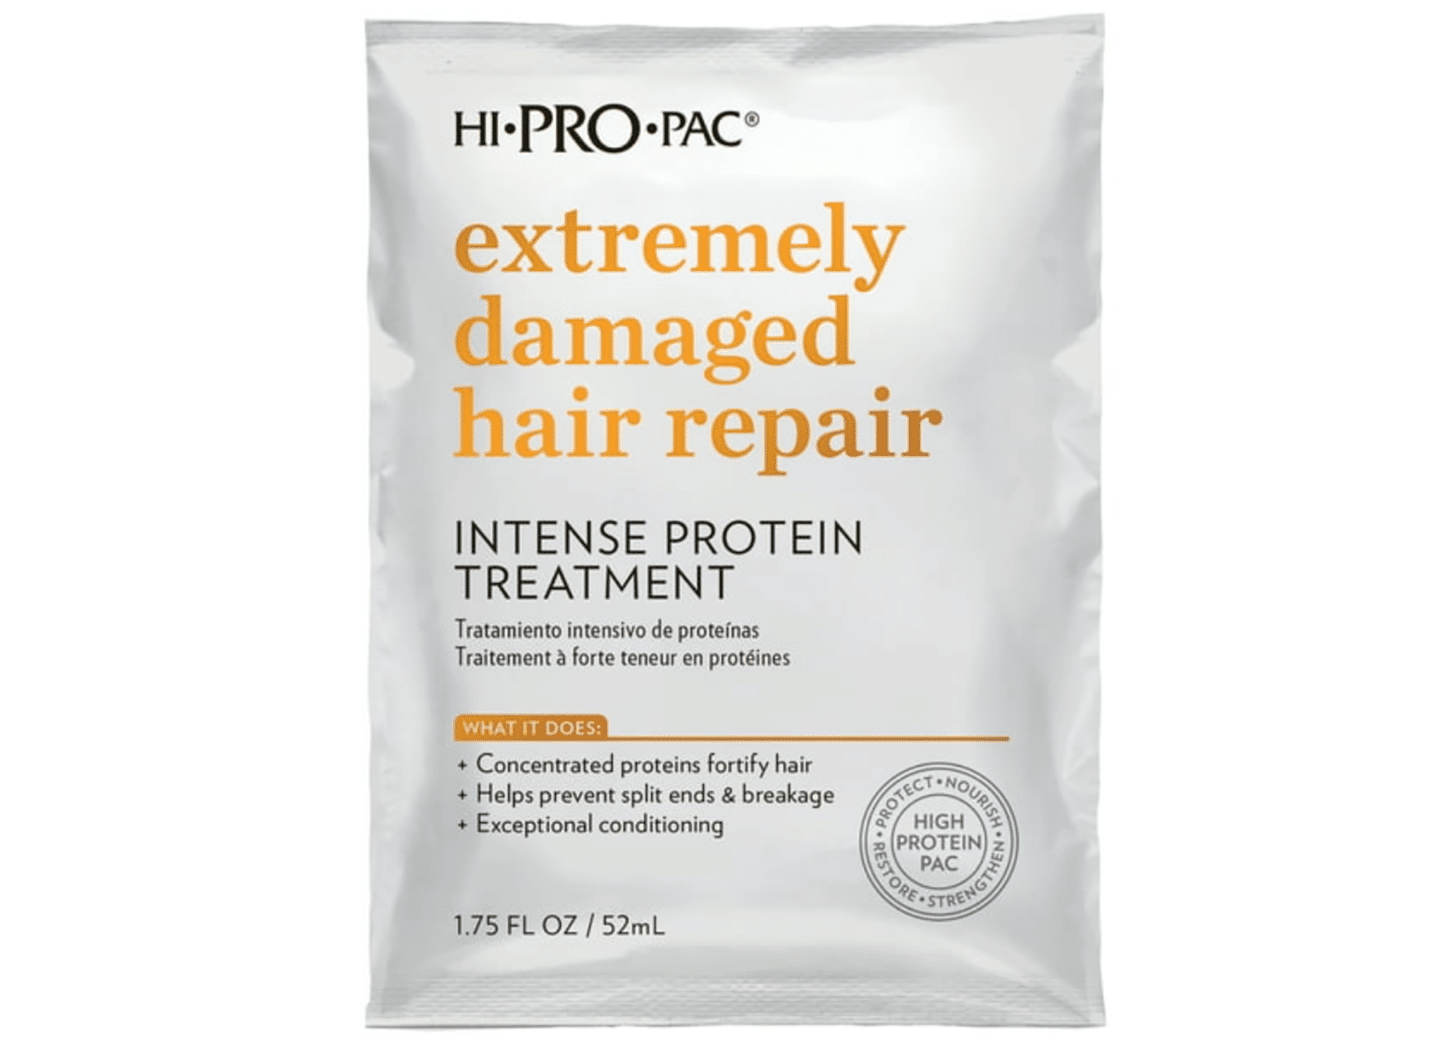 Salon-quality at home hair protein treatment, by beauty blogger What The Fab